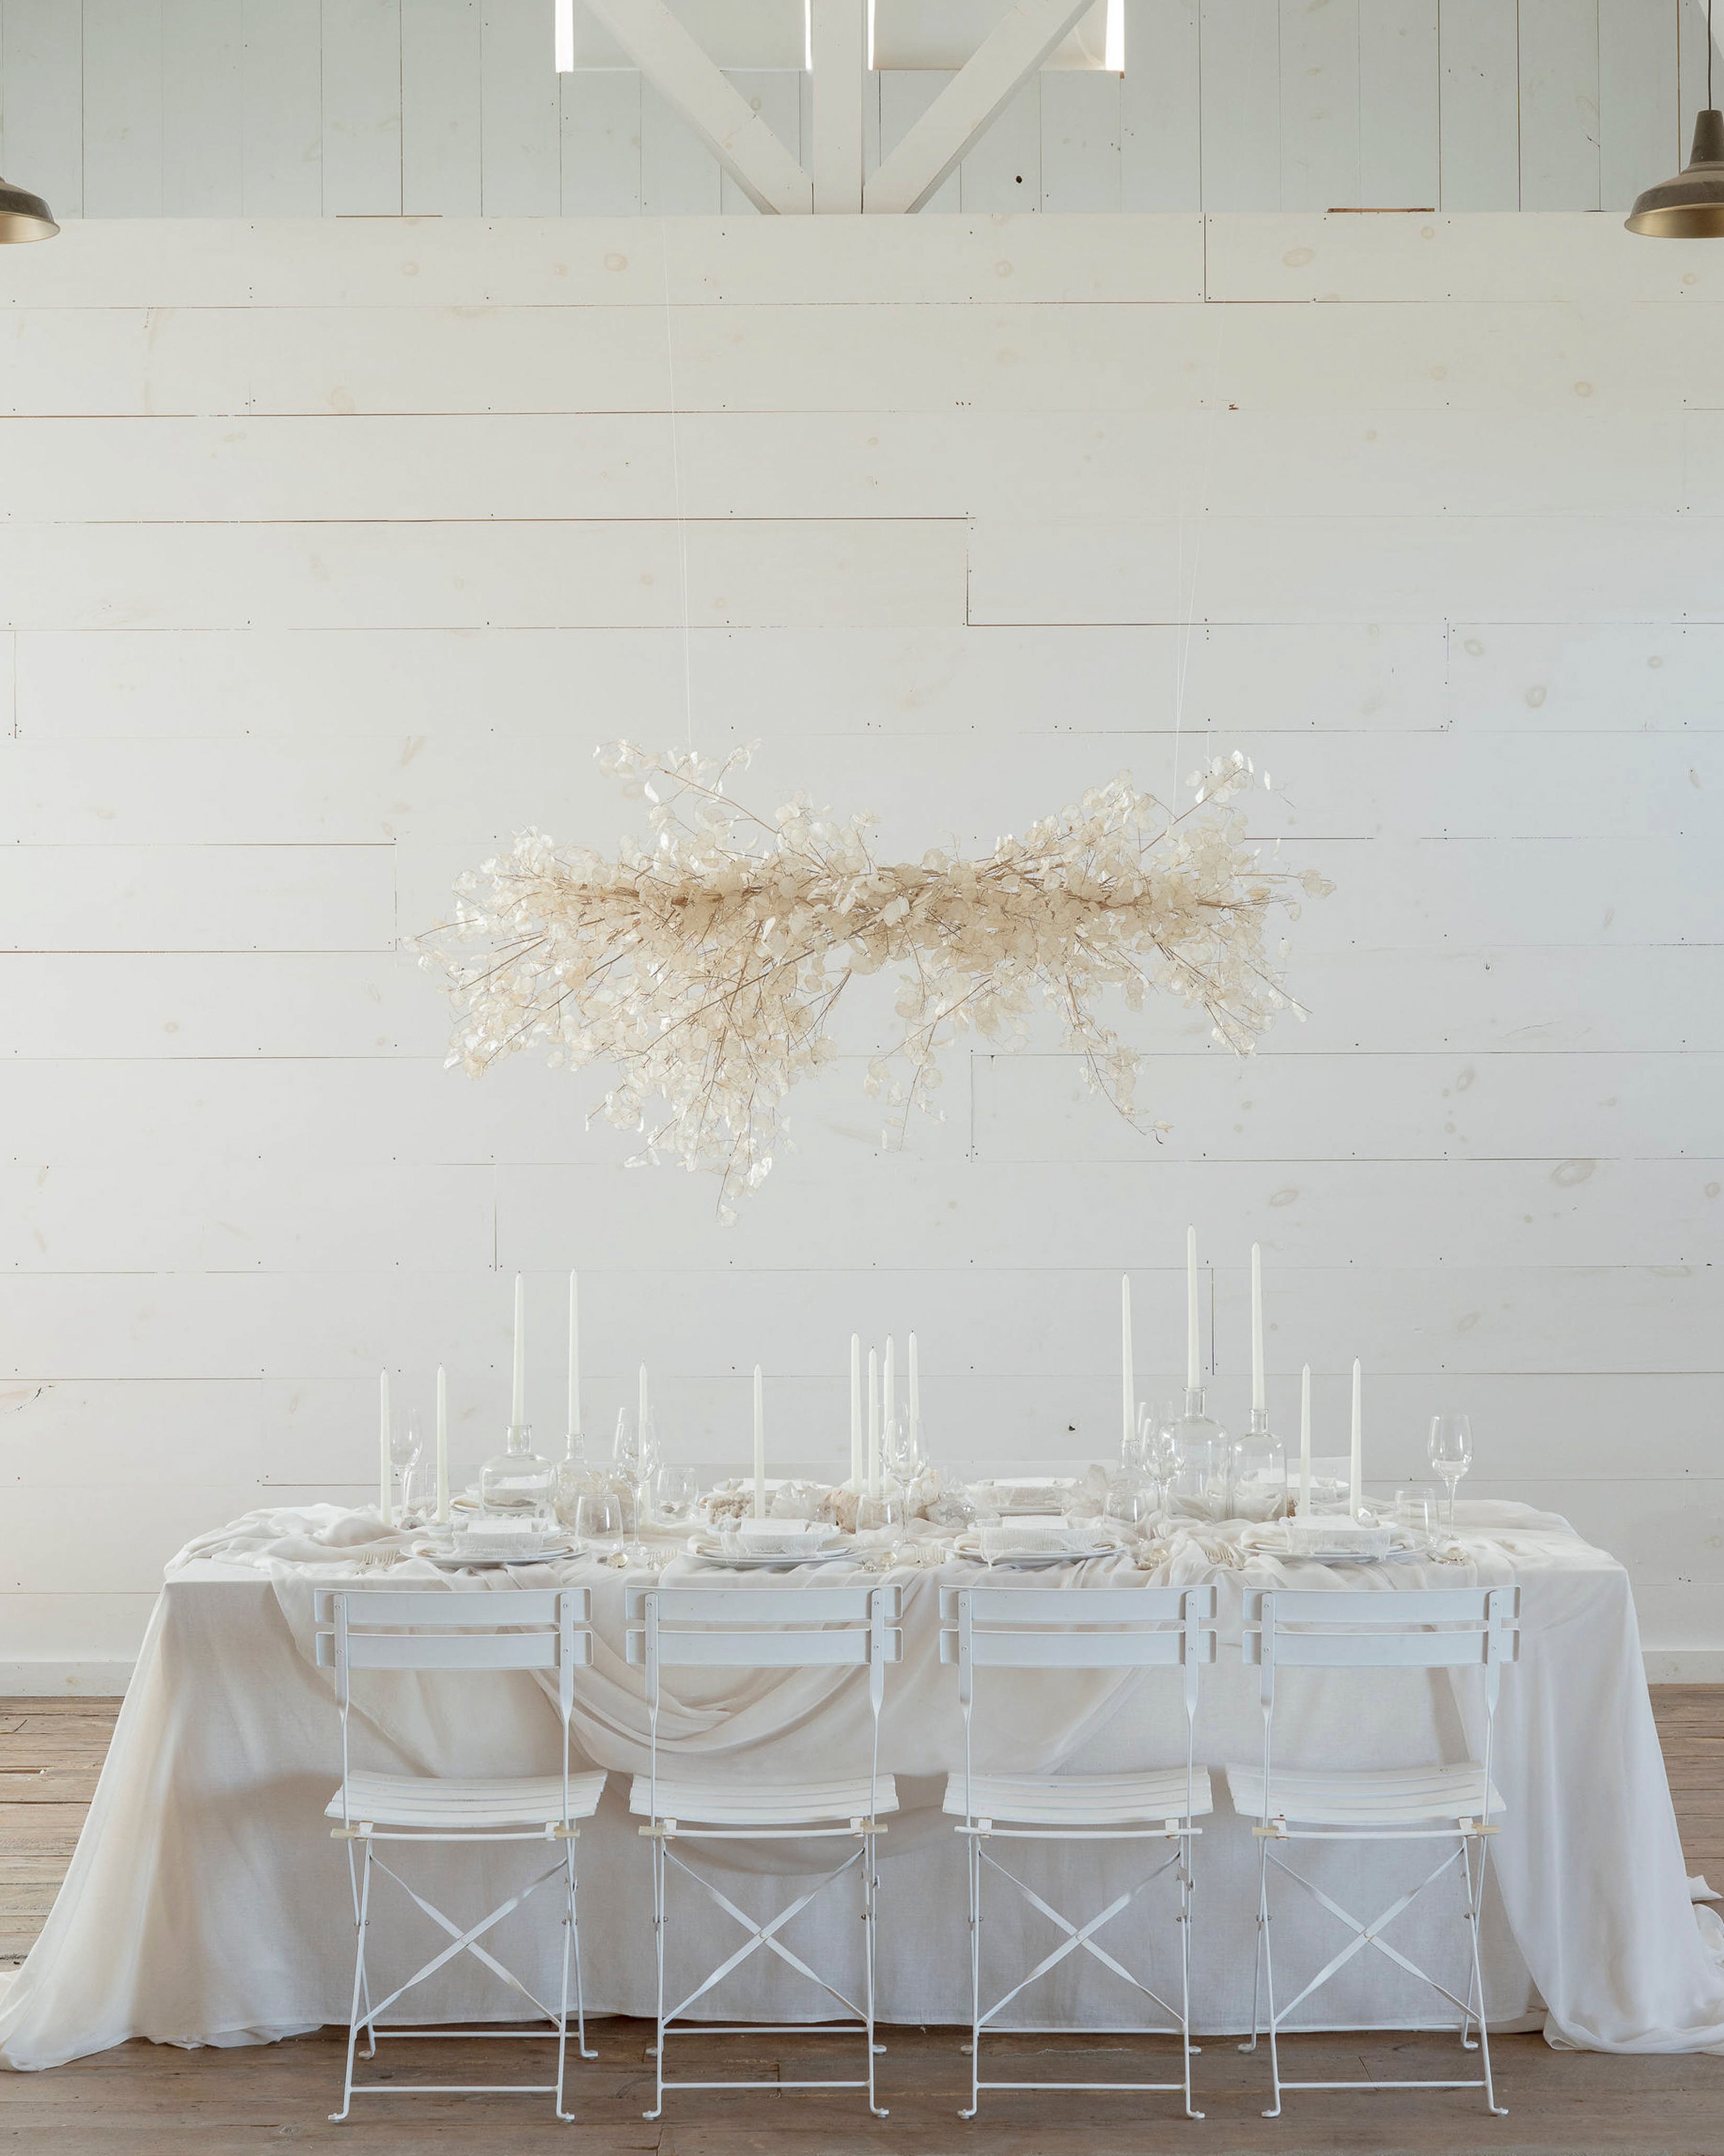 silk and willow table setting design  with custom table linens for your wedding decor